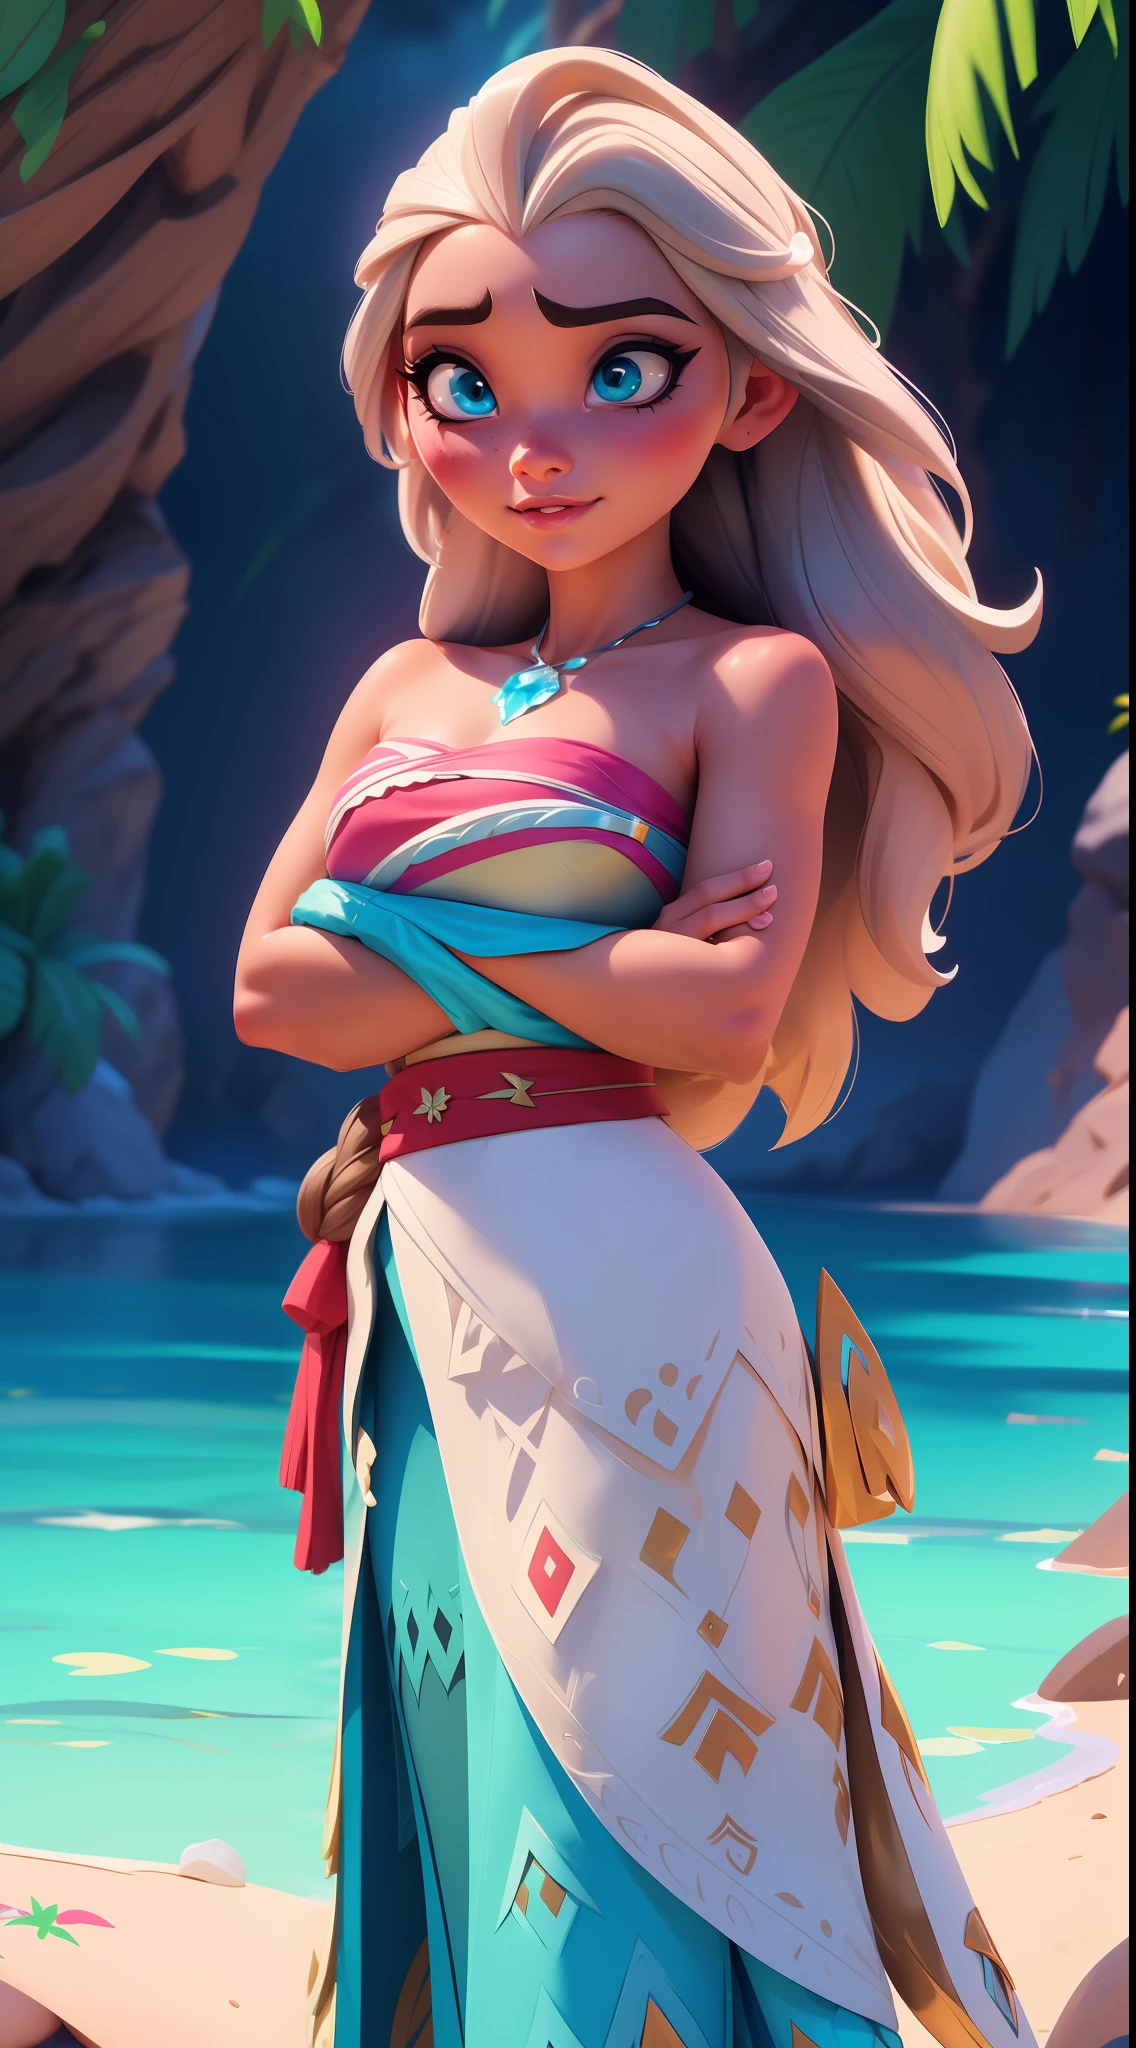 Elsa-Moana Fusion, Merging models, Moana&#39;s clothes, melting, 1girl, Beautiful, character, Woman, female, beachfront, (master part:1.2), (best qualityer:1.2), (standing alone:1.2), ((struggling pose)), ((field of battle)), cinemactic, perfects eyes, perfect  skin, perfect lighting, sorrido, Lumiere, Farbe, texturized skin, detail, Beauthfull, wonder wonder wonder wonder wonder wonder wonder wonder wonder wonder wonder wonder wonder wonder wonder wonder wonder wonder wonder wonder wonder wonder wonder wonder wonder wonder wonder wonder wonder wonder wonder wonder, ultra detali, face perfect